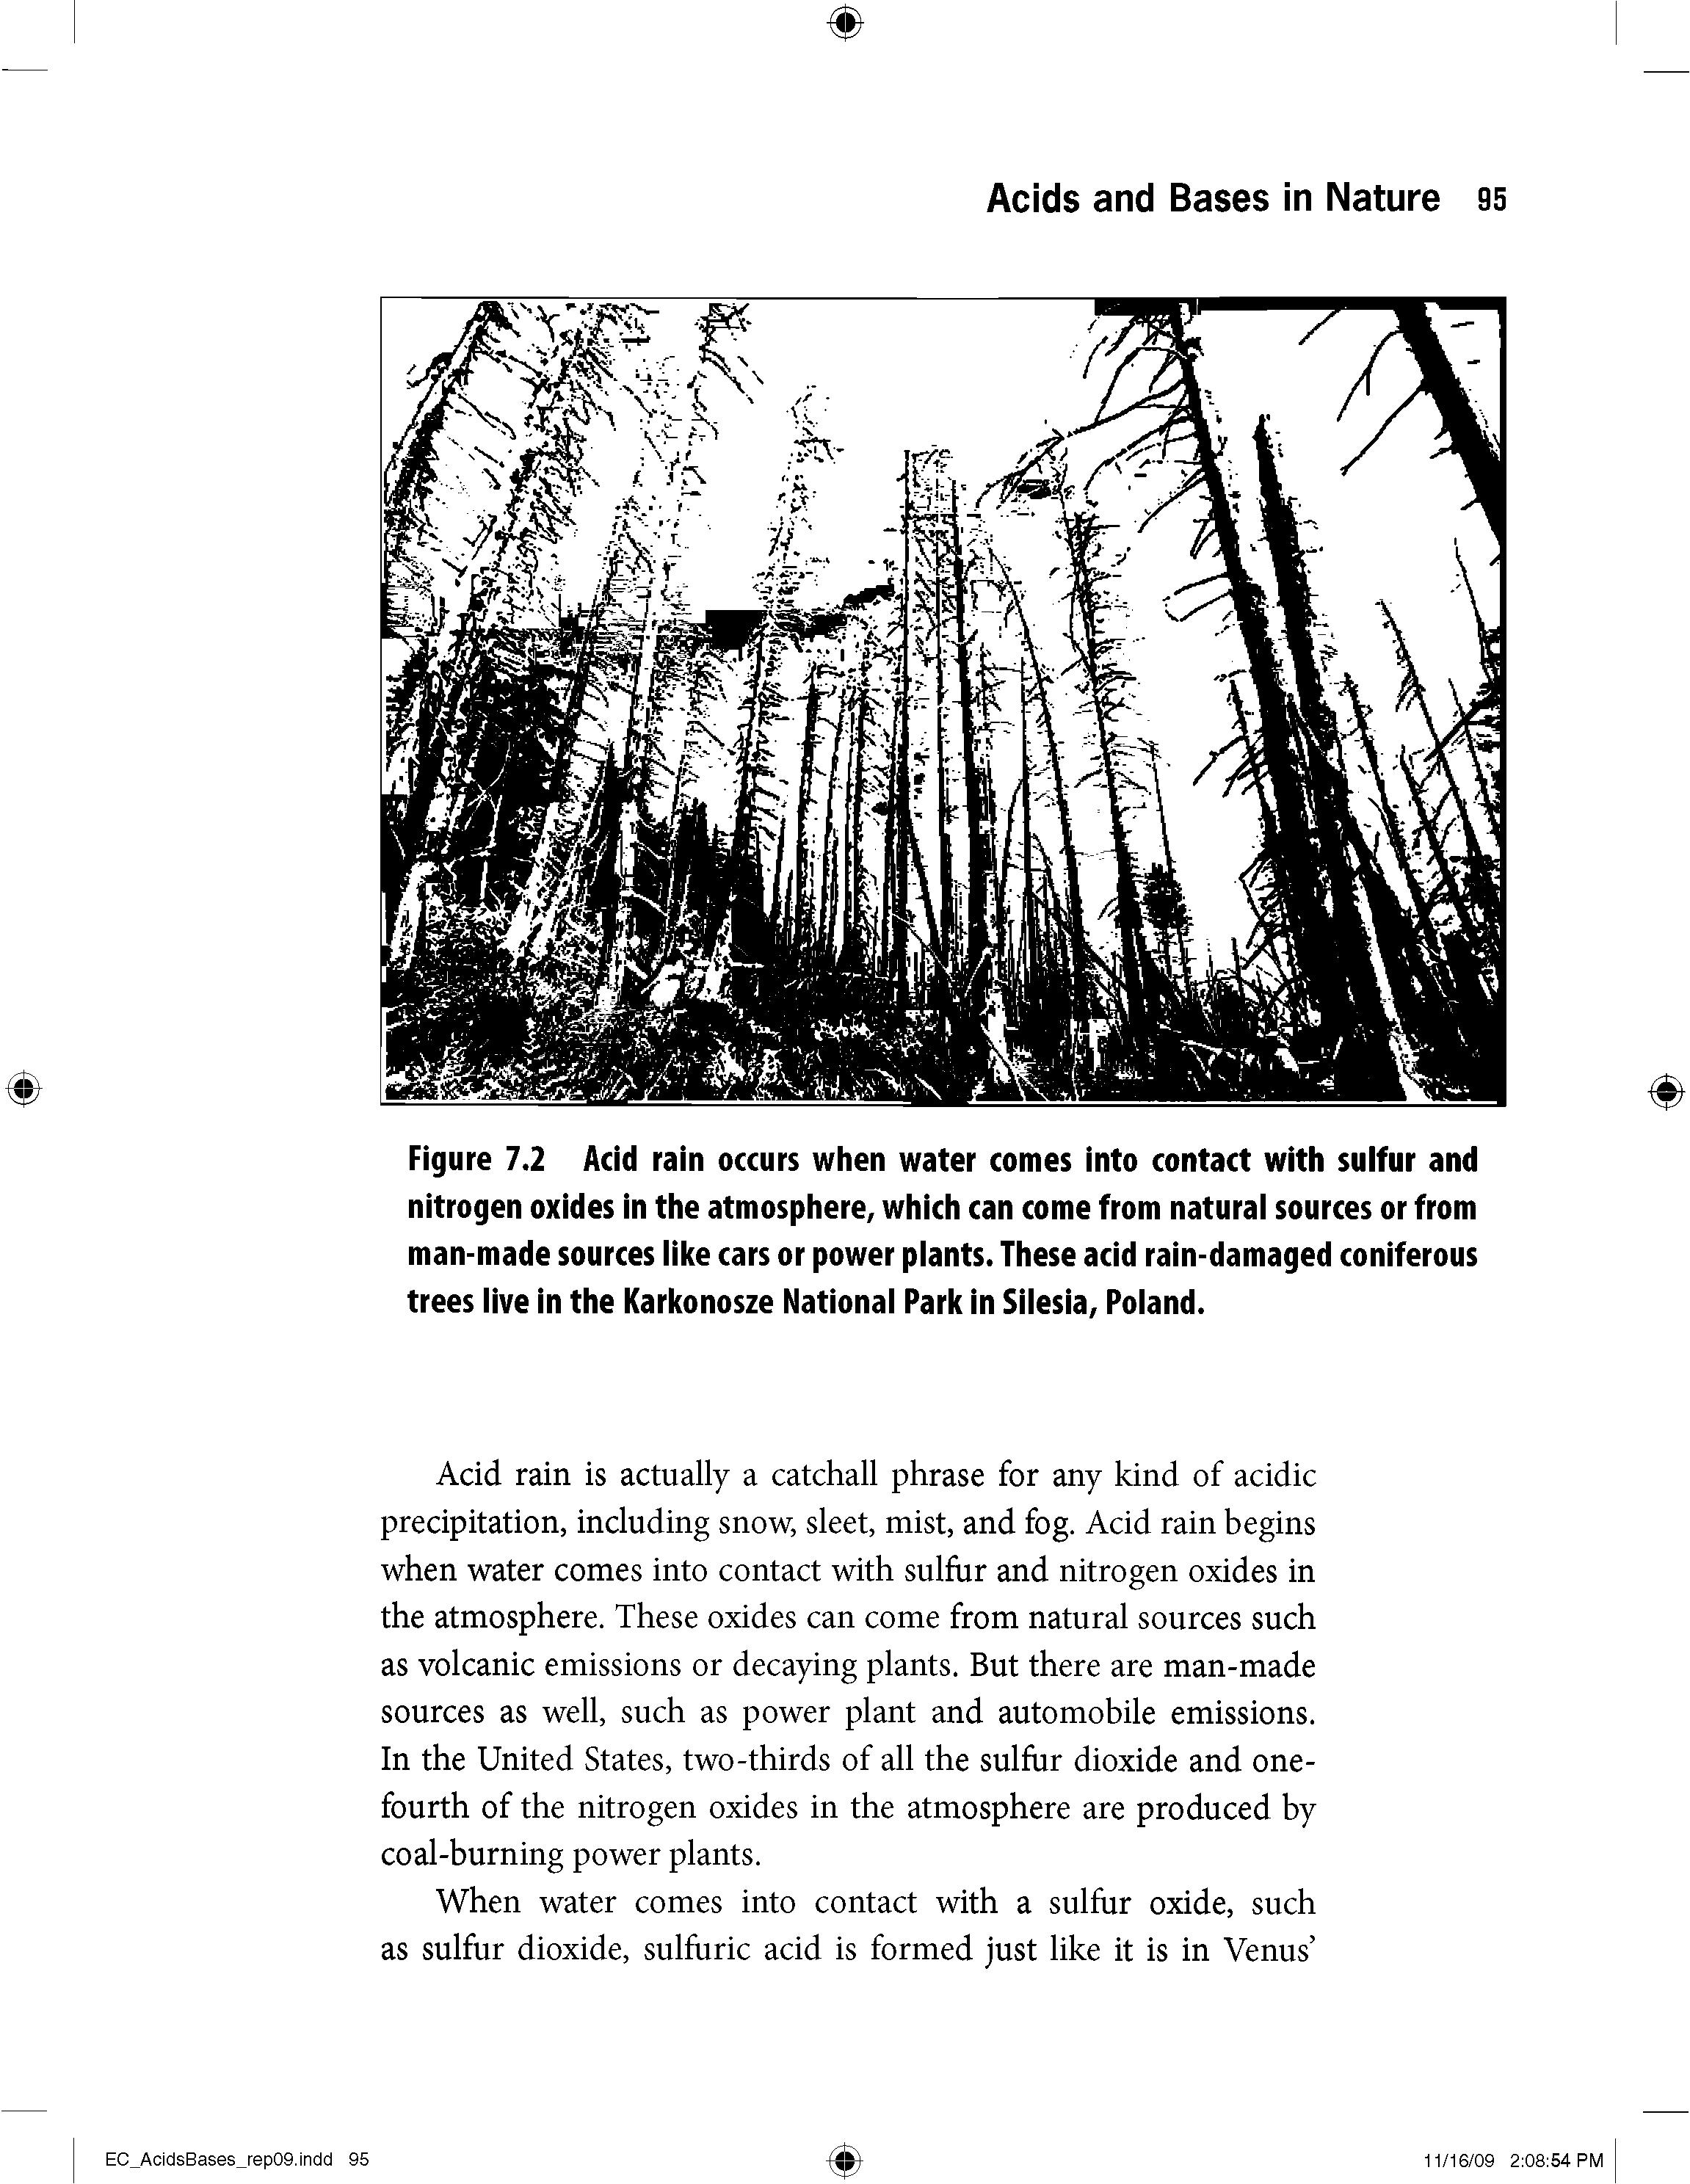 Figure 7.2 Acid rain occurs when water comes into contact with sulfur and nitrogen oxides in the atmosphere, which can come from natural sources or from man-made sources like cars or power plants. These acid rain-damaged coniferous trees live in the Karkonosze National Park in Silesia, Poland.